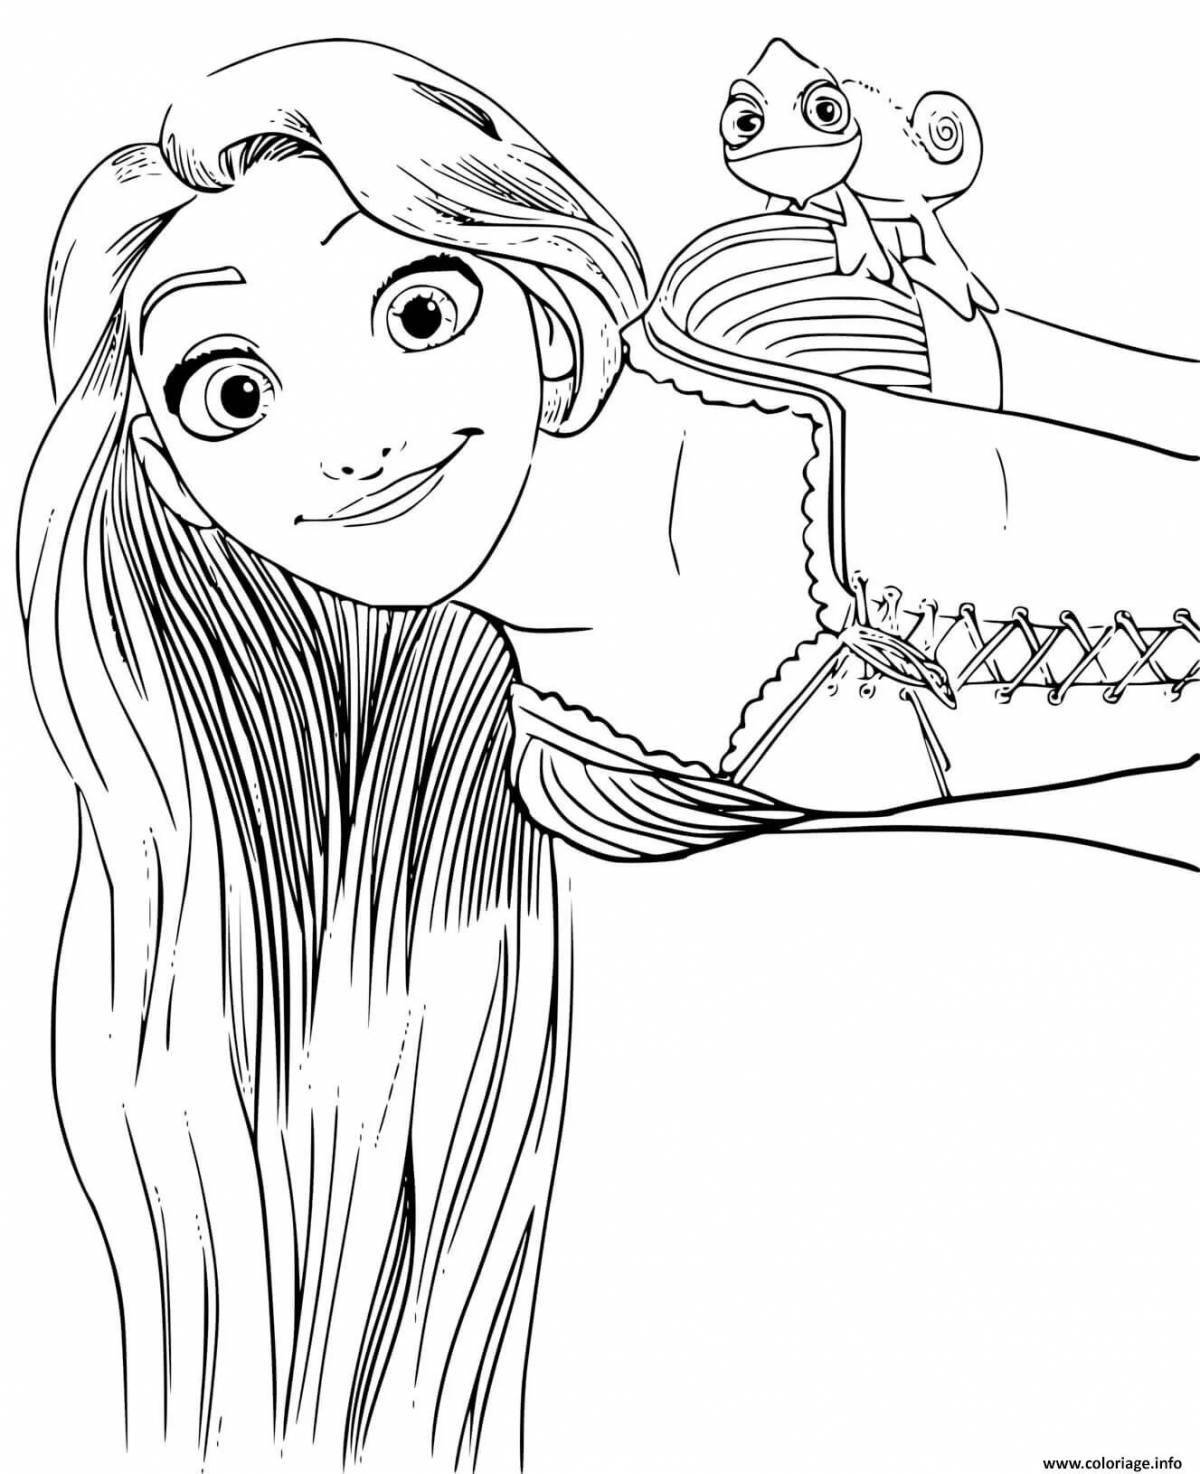 Tangled Little's awesome coloring book